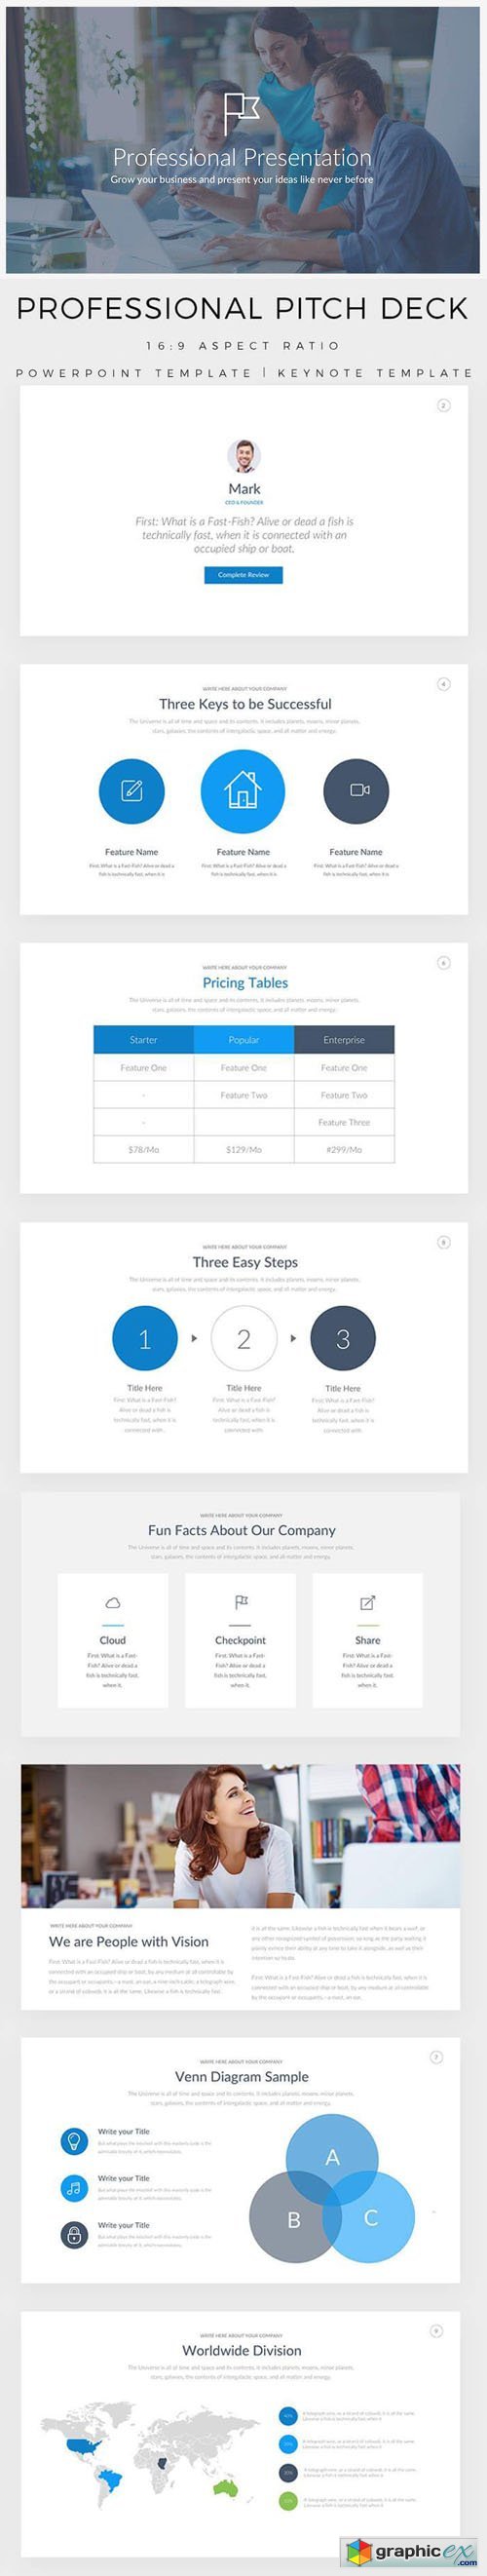 Professional Pitch Deck PowerPoint & Keynote Template